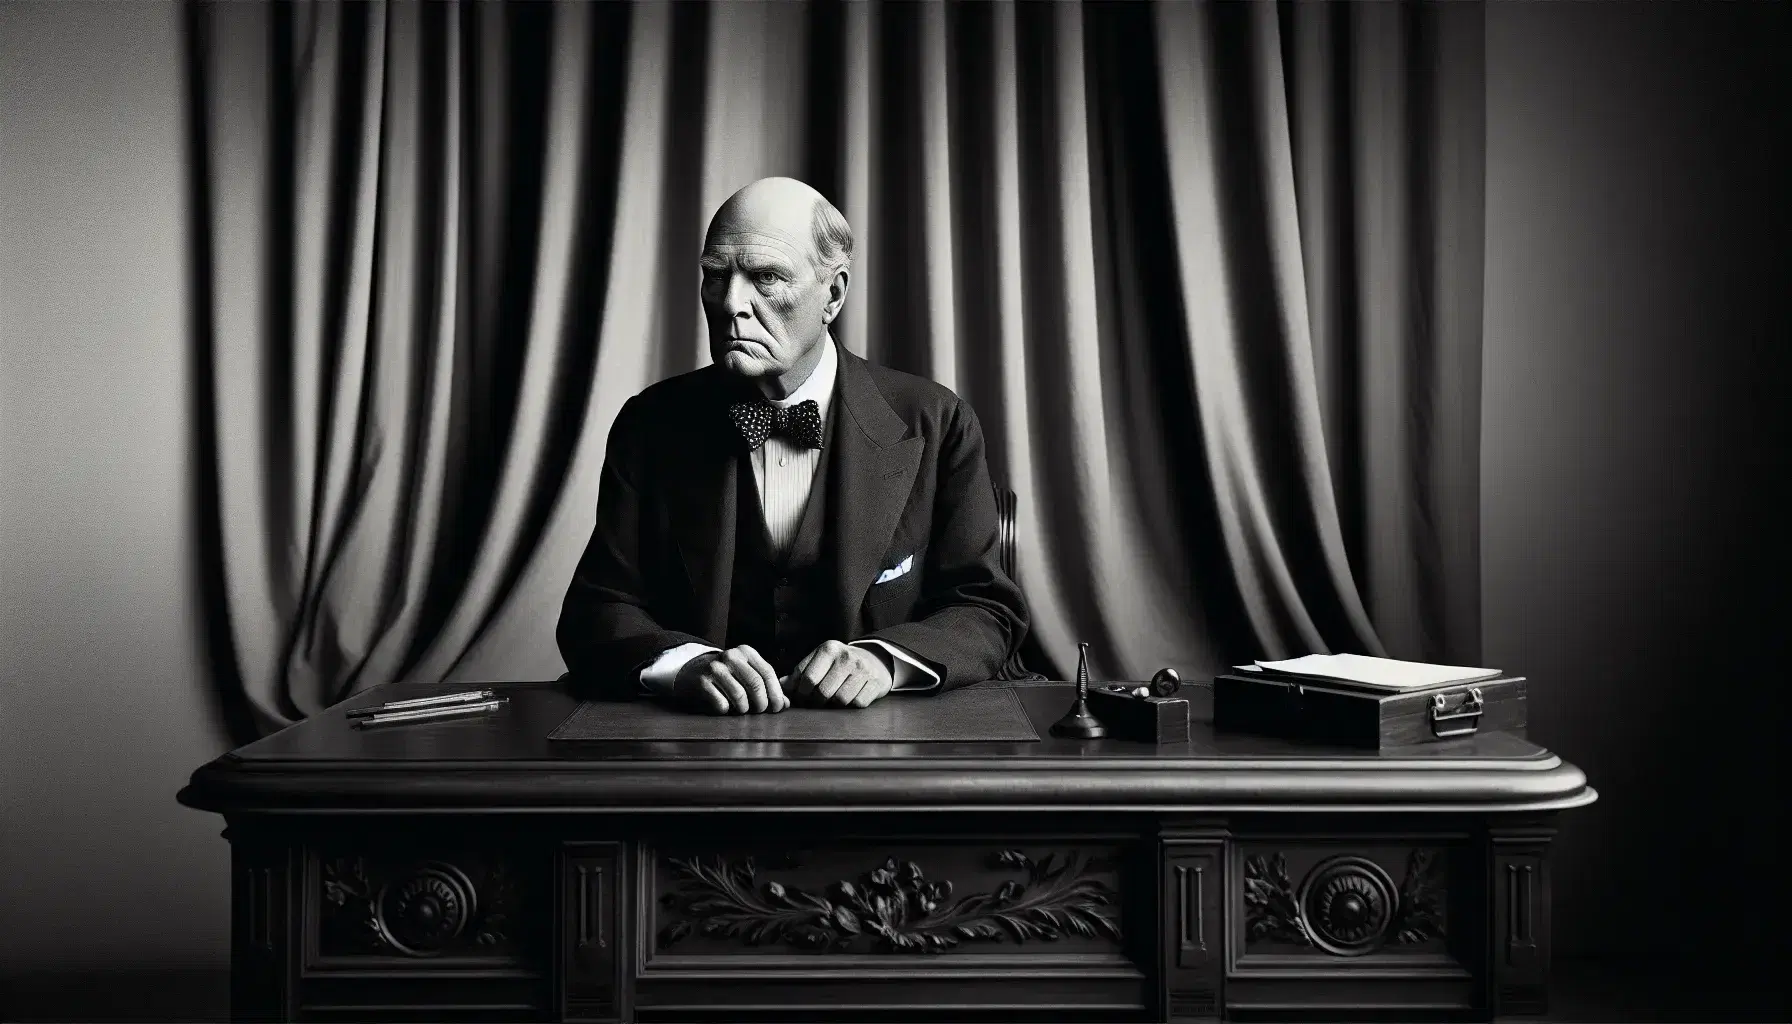 Stern, contemplative politician with balding head and jowly face, dressed in dark suit and dotted bow tie, seated at an empty, ornate desk with a draped curtain backdrop.